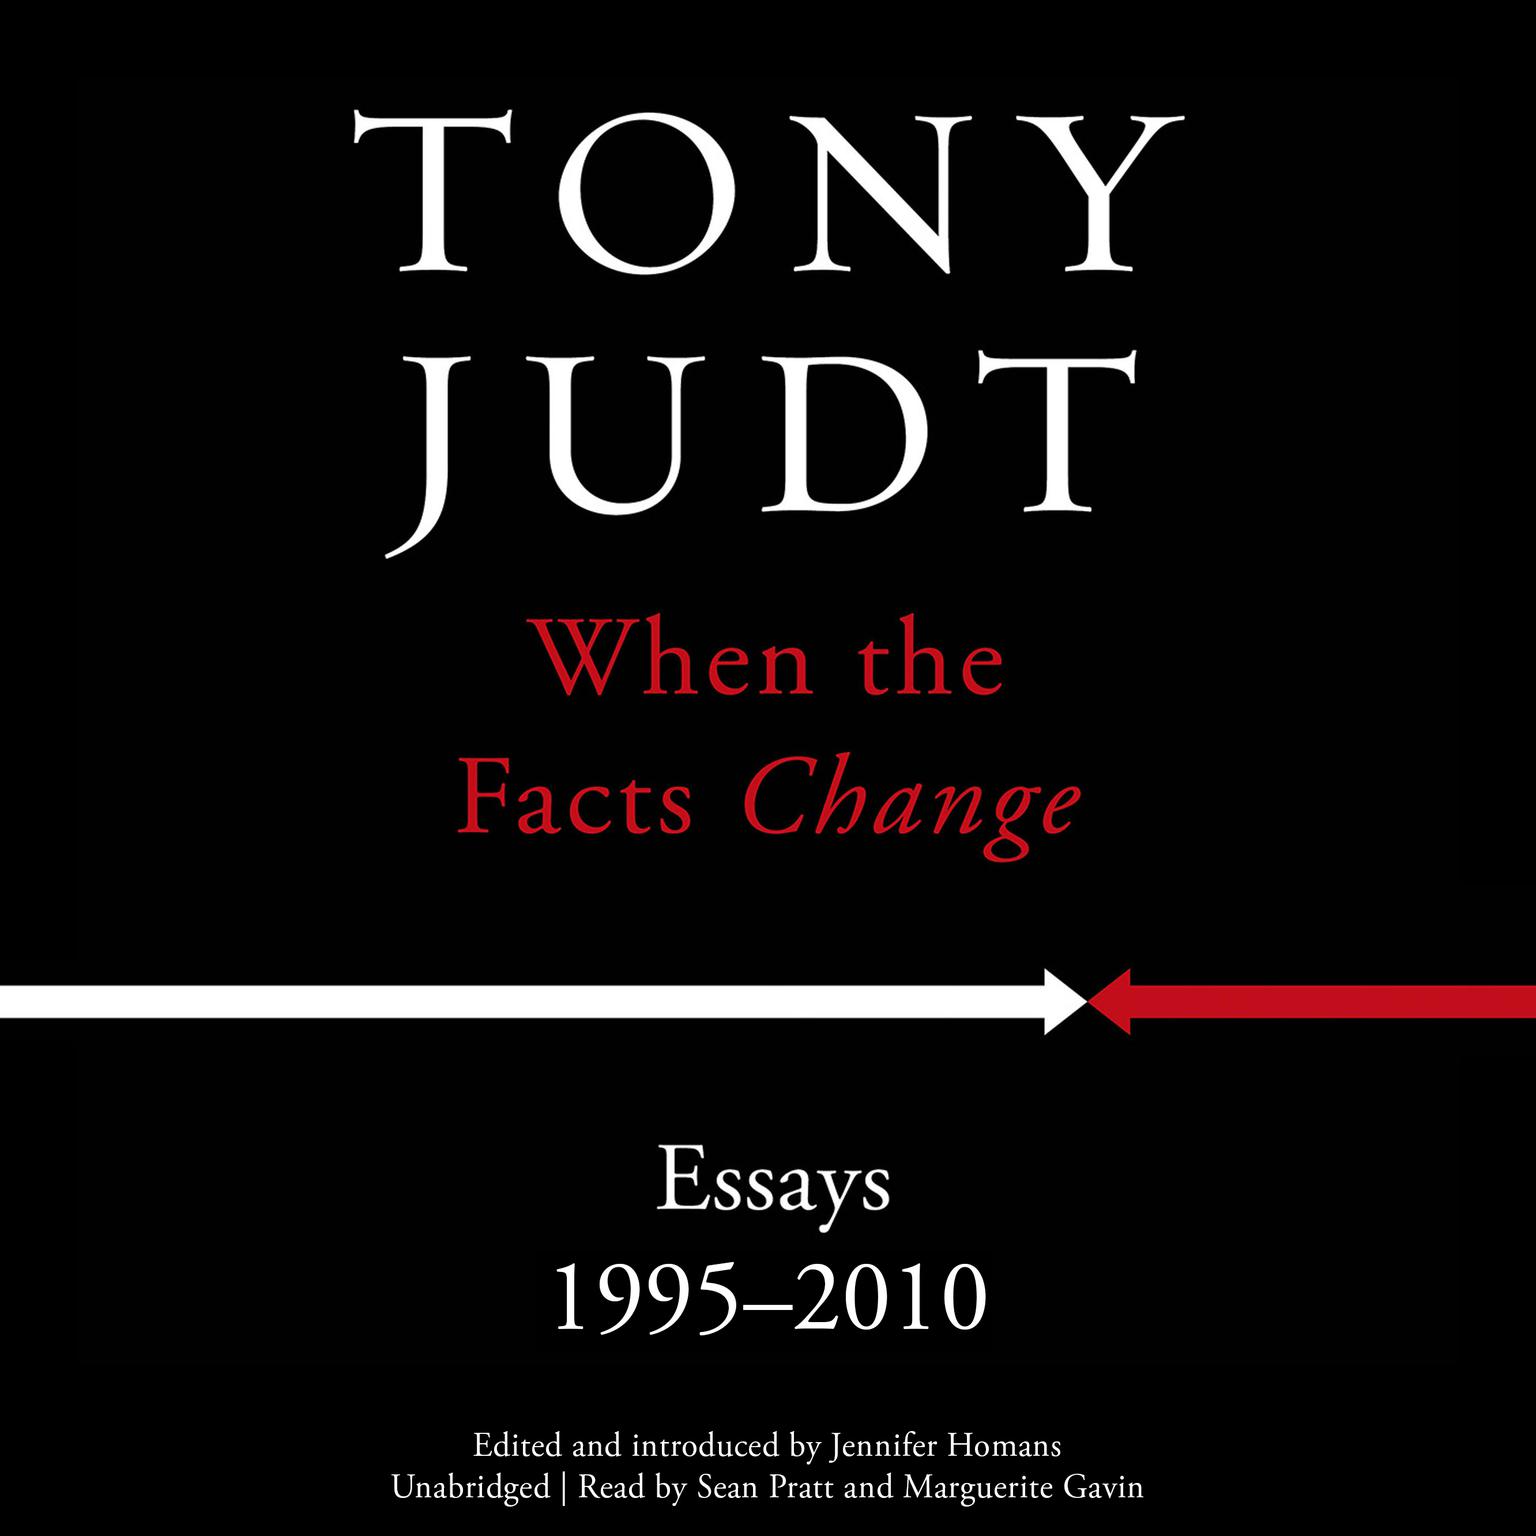 When the Facts Change: Essays, 1995-2010 Audiobook, by Tony Judt